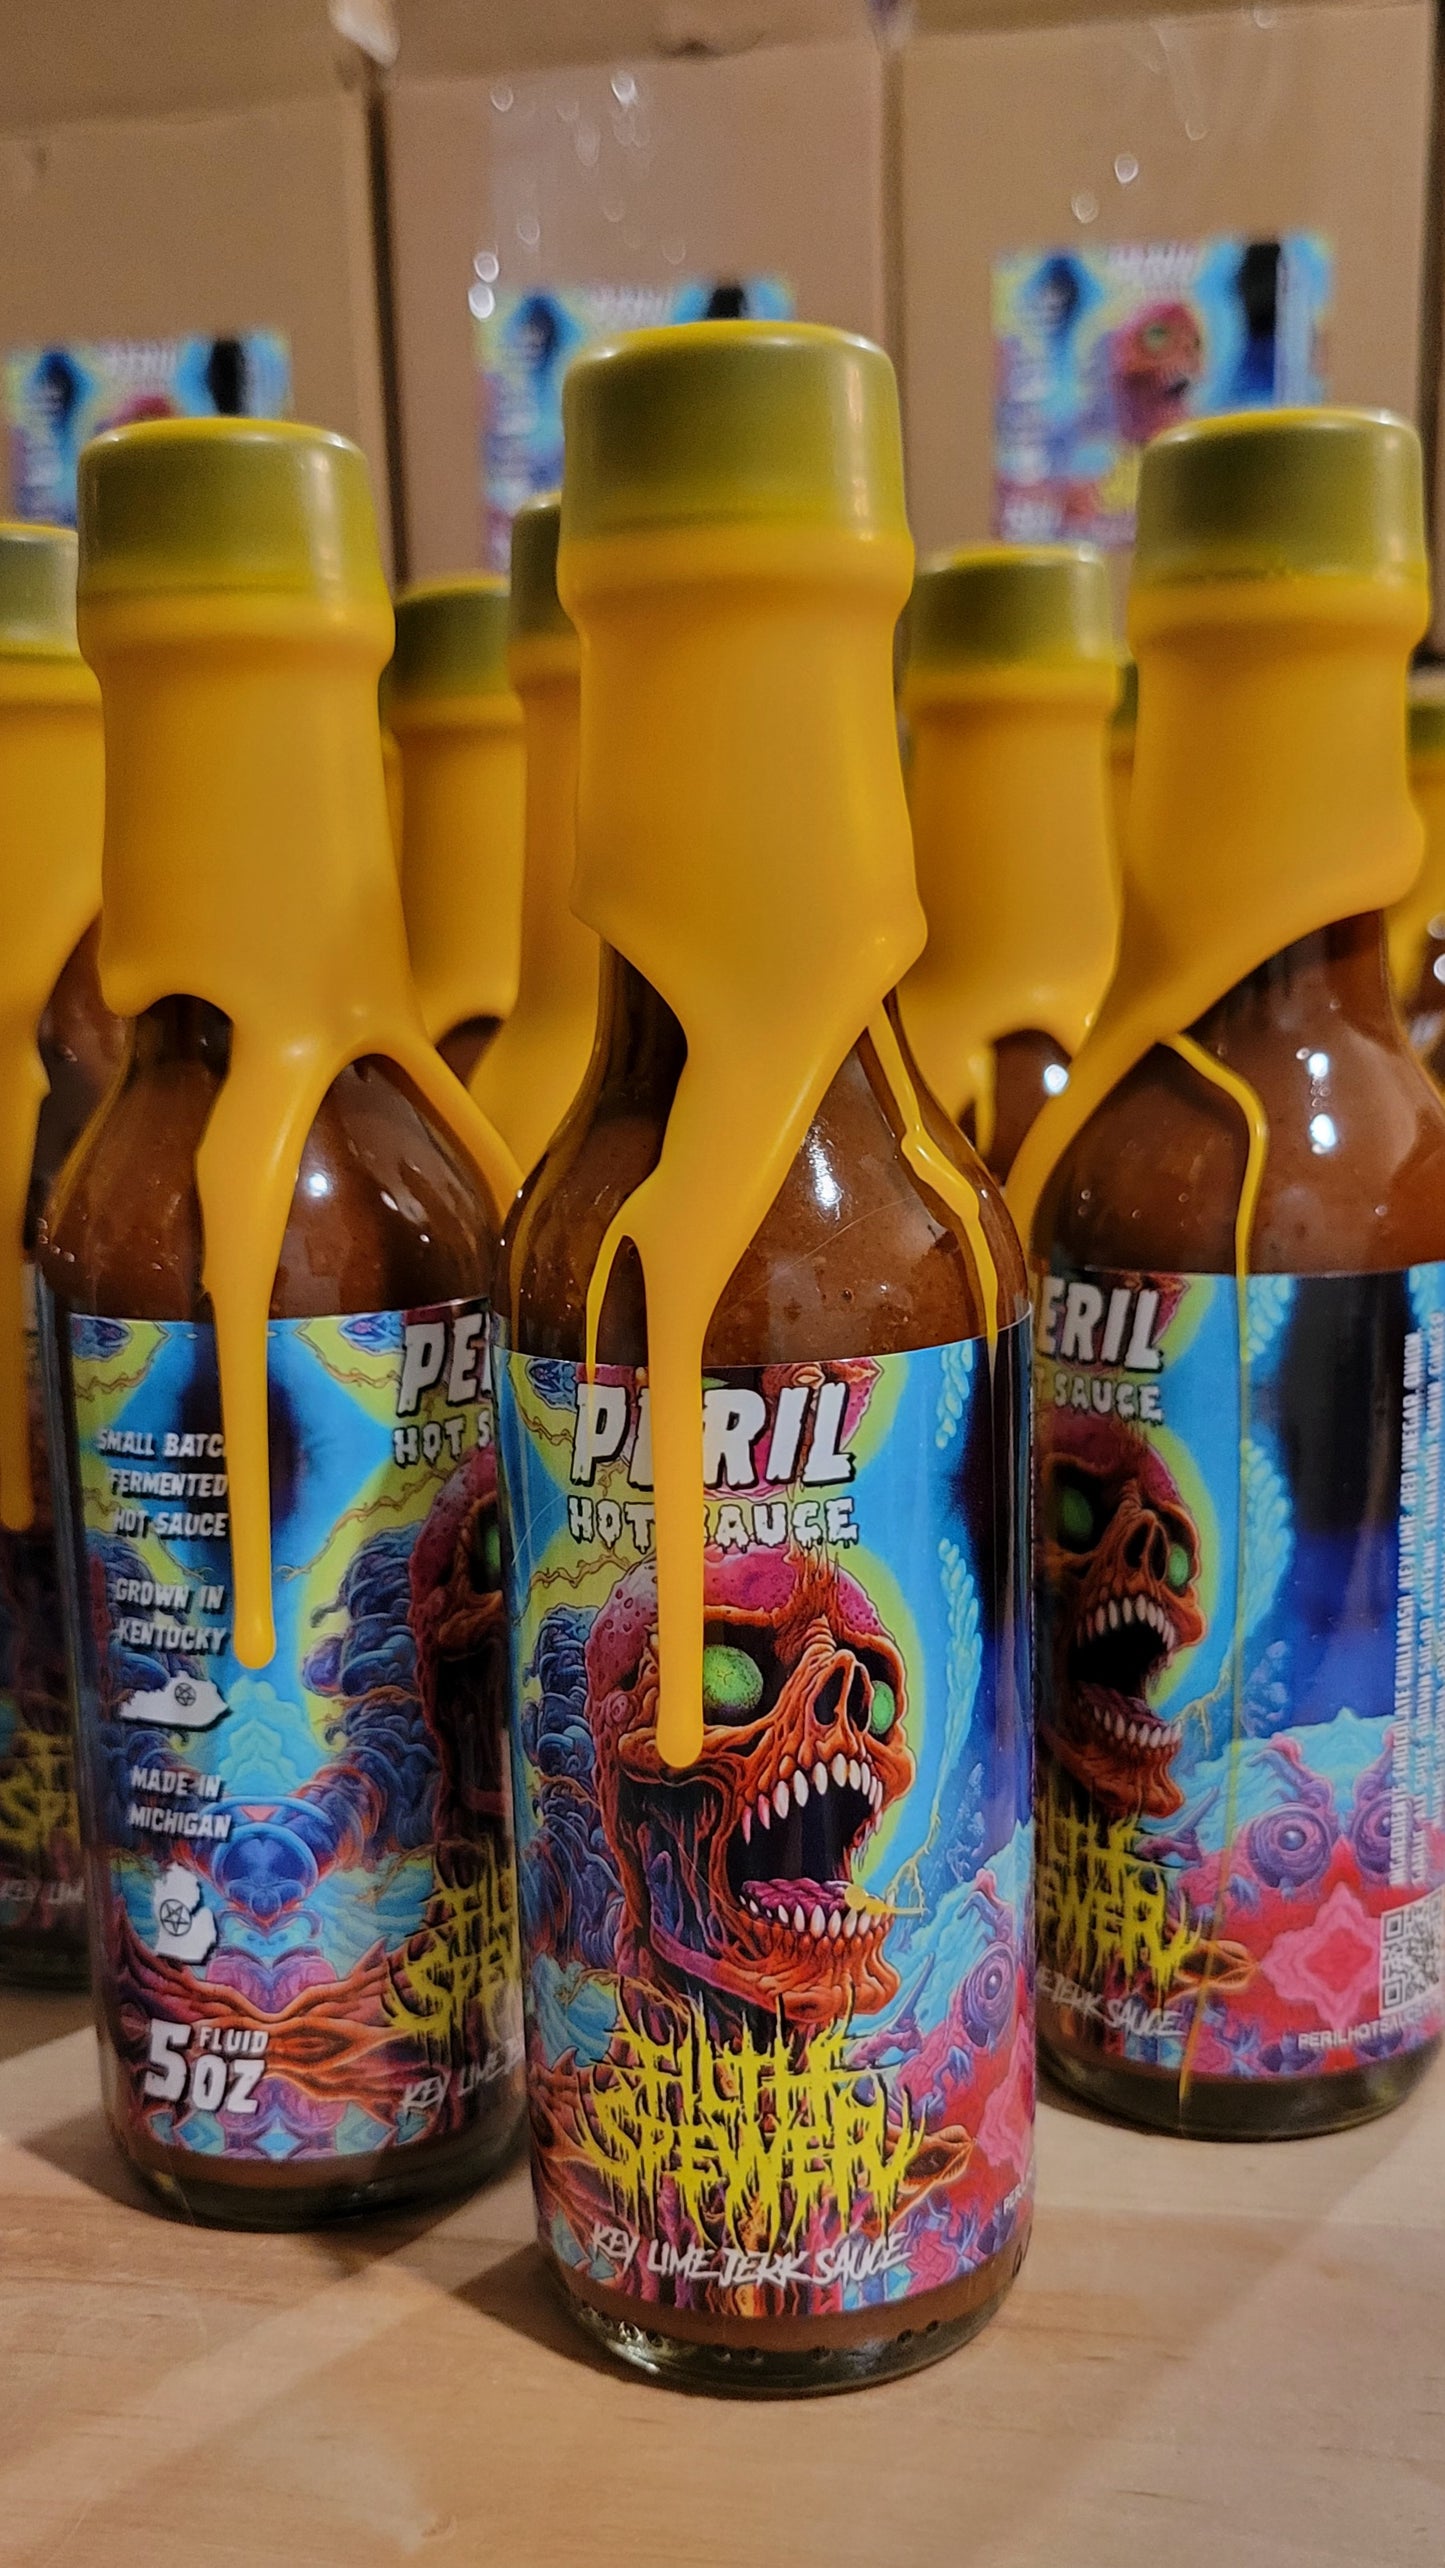 FILTH SPEWER Special Edition wax dipped bottle